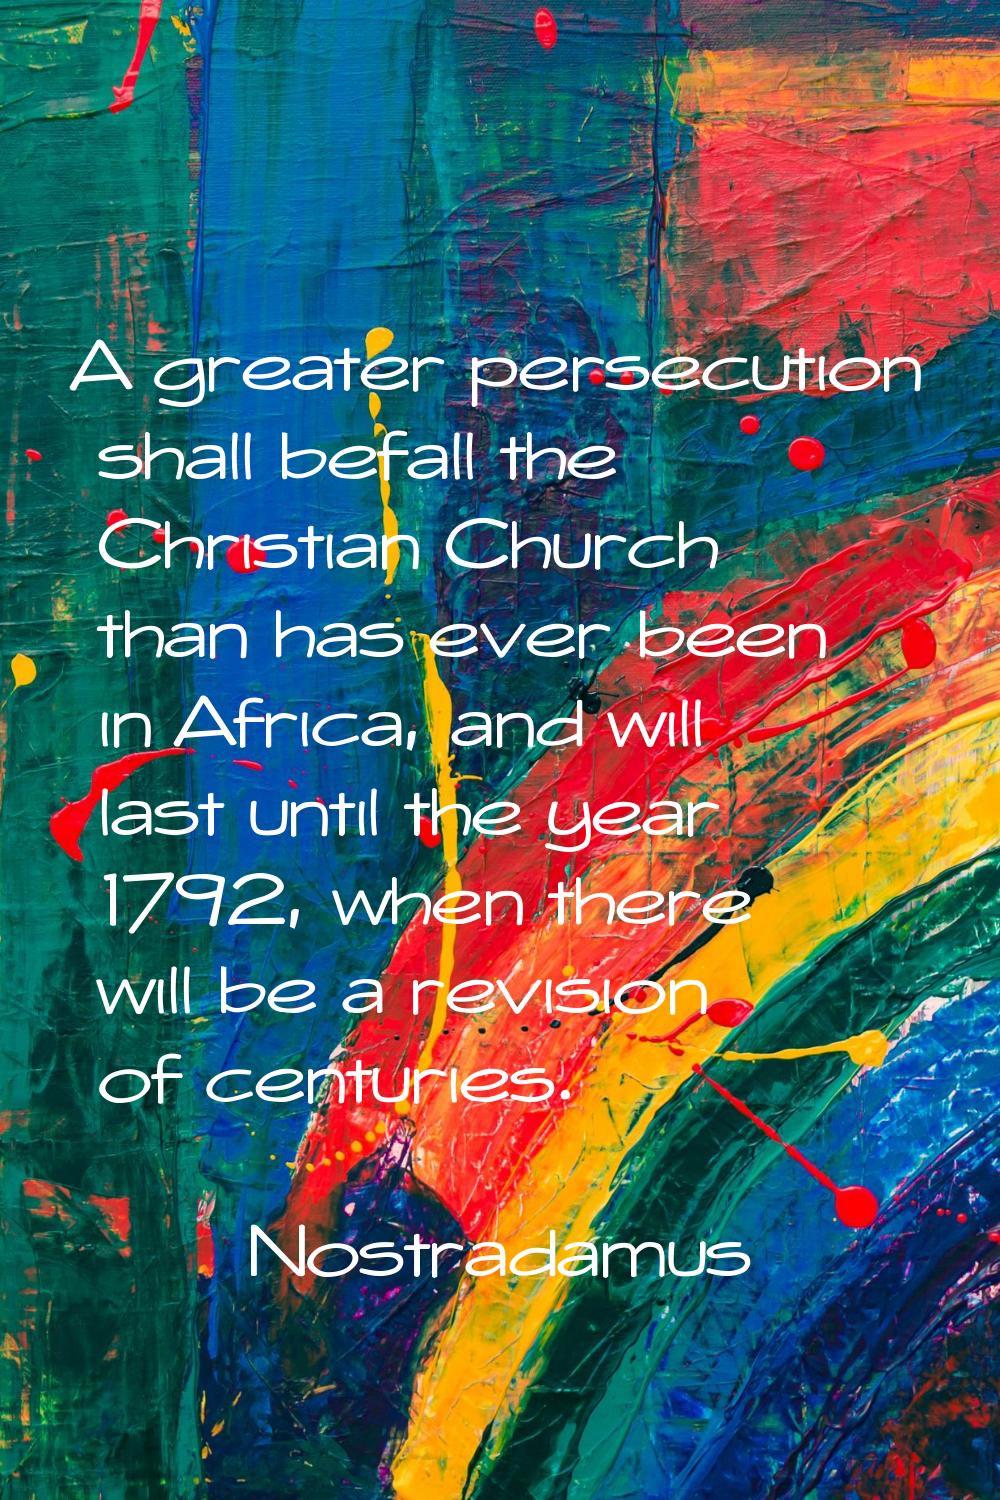 A greater persecution shall befall the Christian Church than has ever been in Africa, and will last